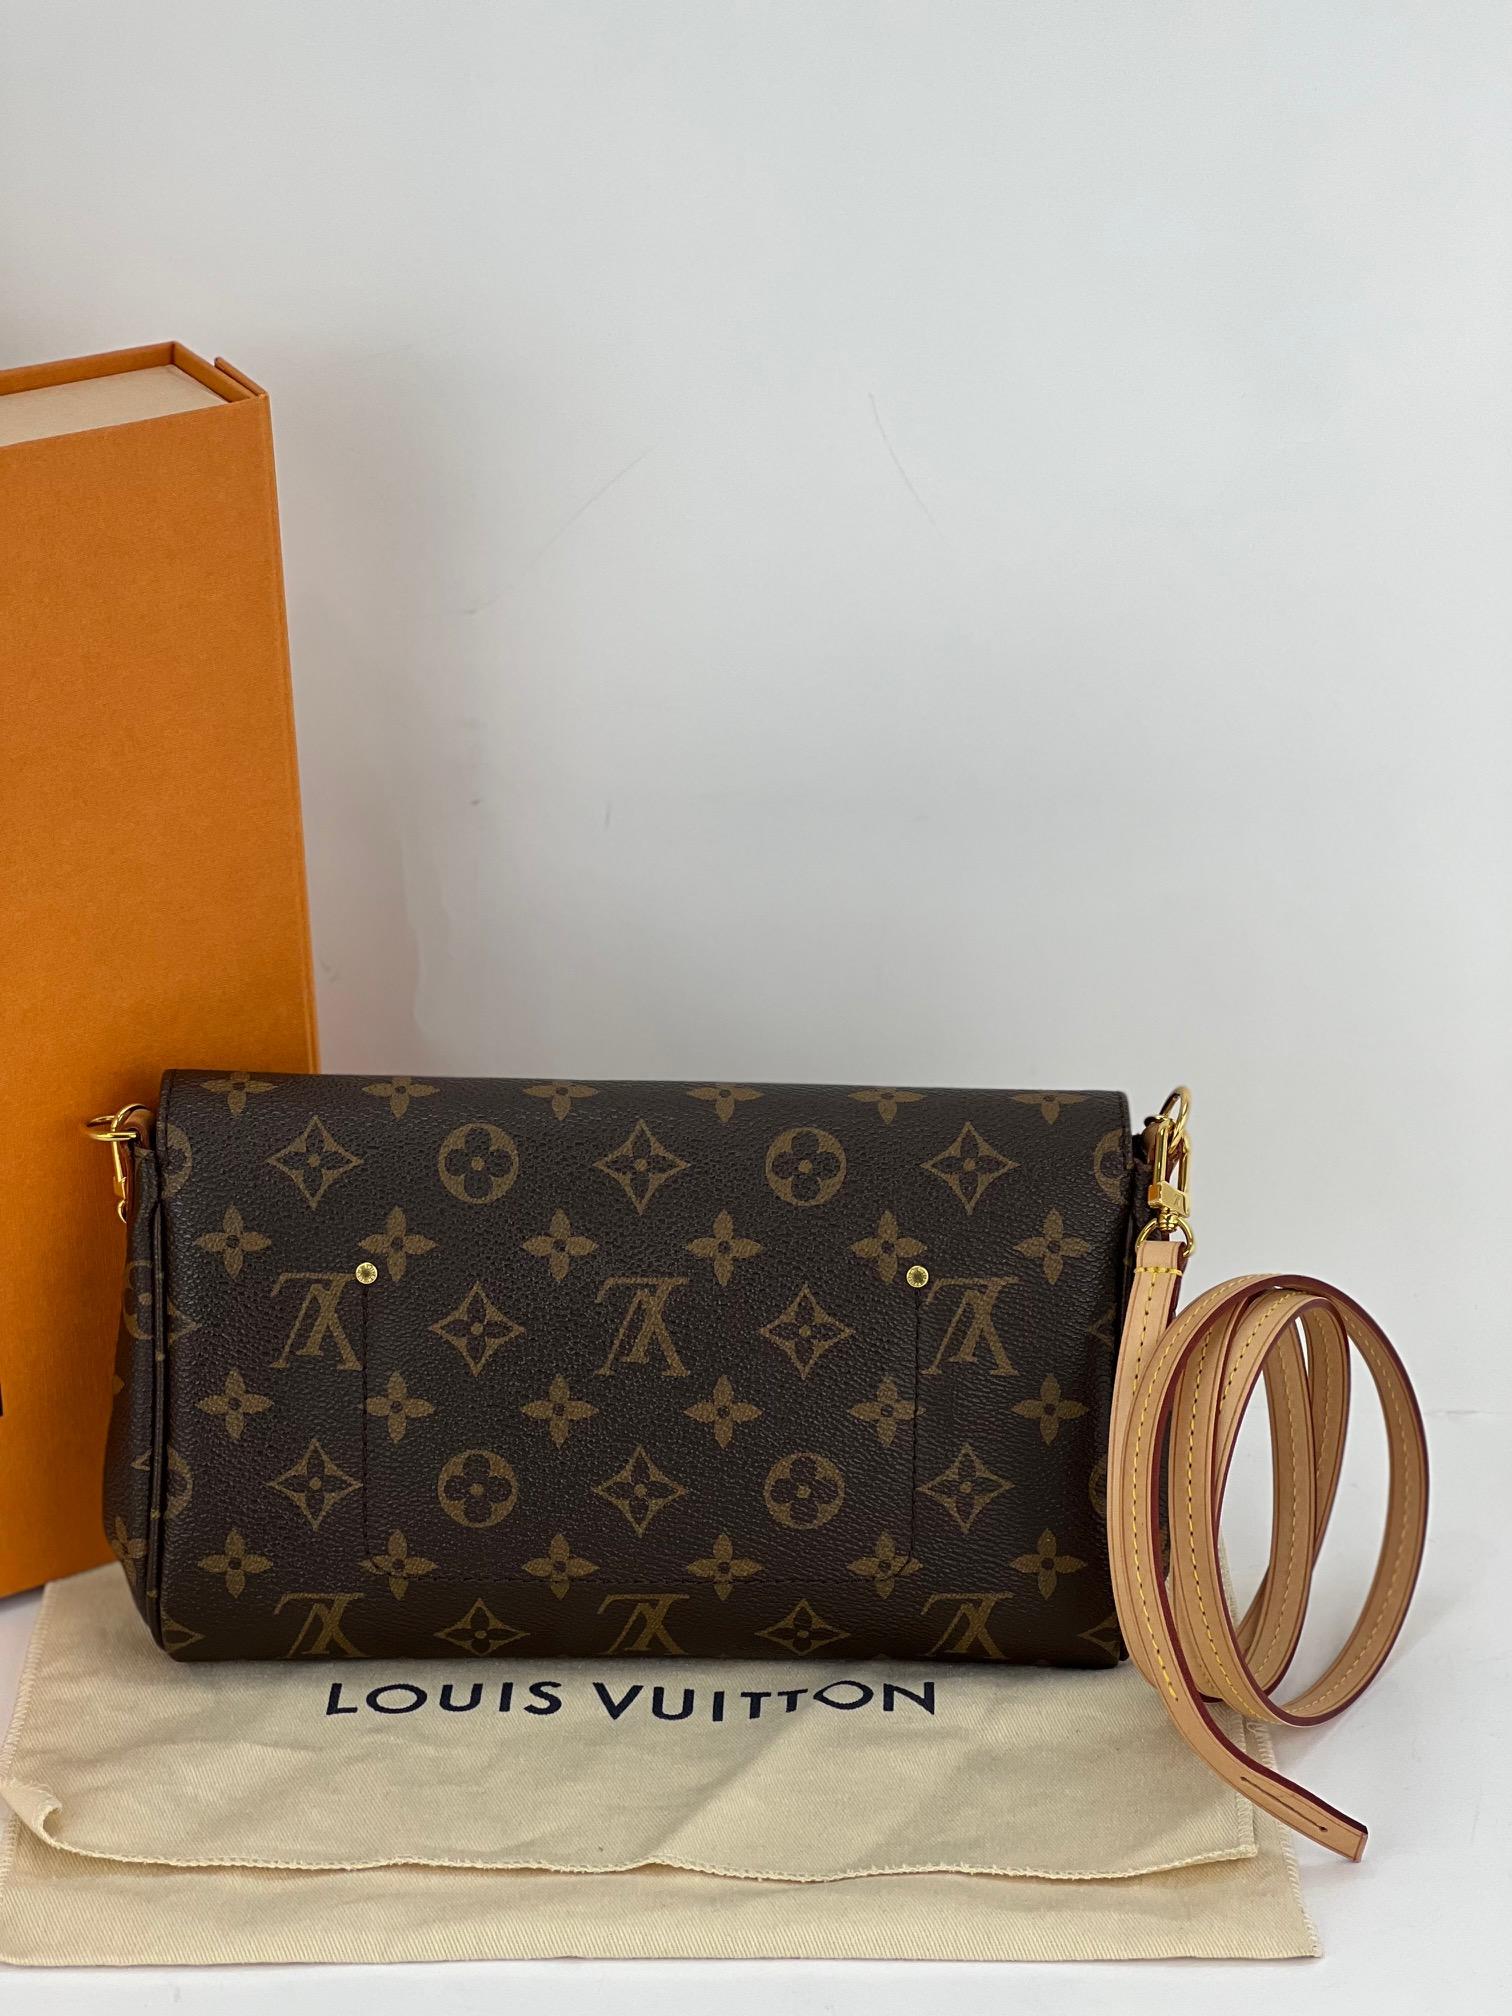 100% Authentic  Pre-Owned 
Louis Vuitton Favorite MM Monogram
M40718
RATING: A/B..Very good, well maintained, shows
minor signs of wear
MATERIAL: monogram canvas, metal, leather
CLOSURE: magnetic
STRAP: LV Leather w/ 1 Claw Hook, has some
marks